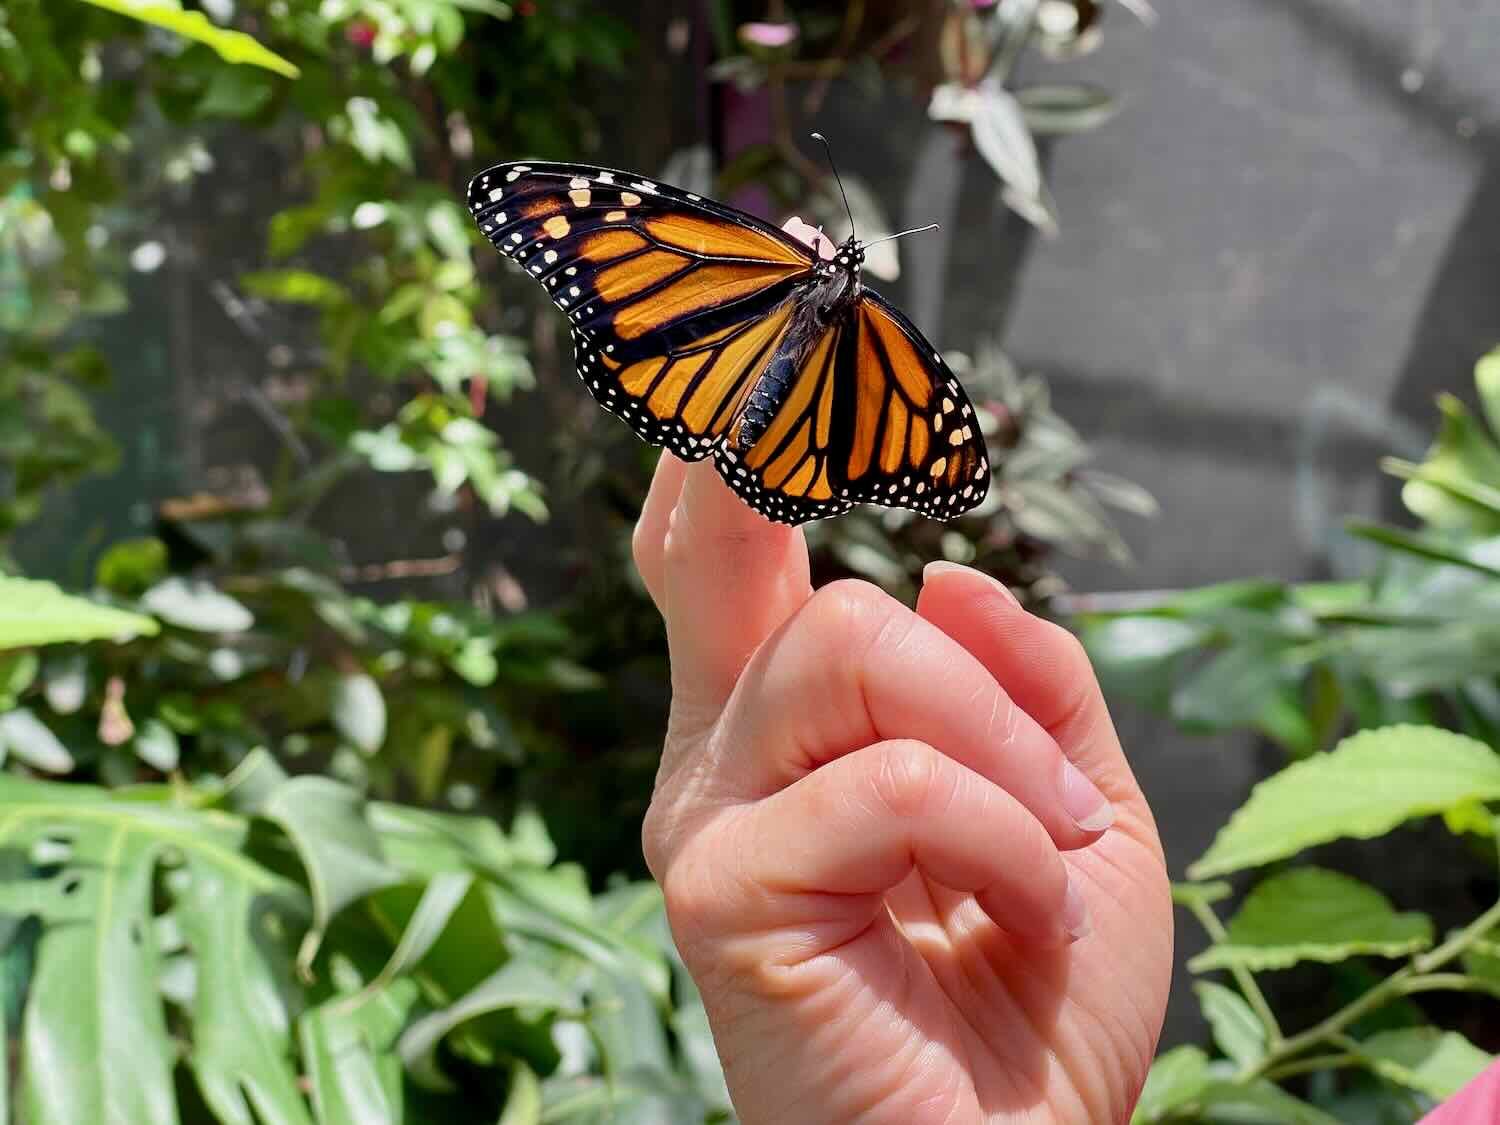 This butterfly had just hatched from its cocoon, and was about to take its first flight